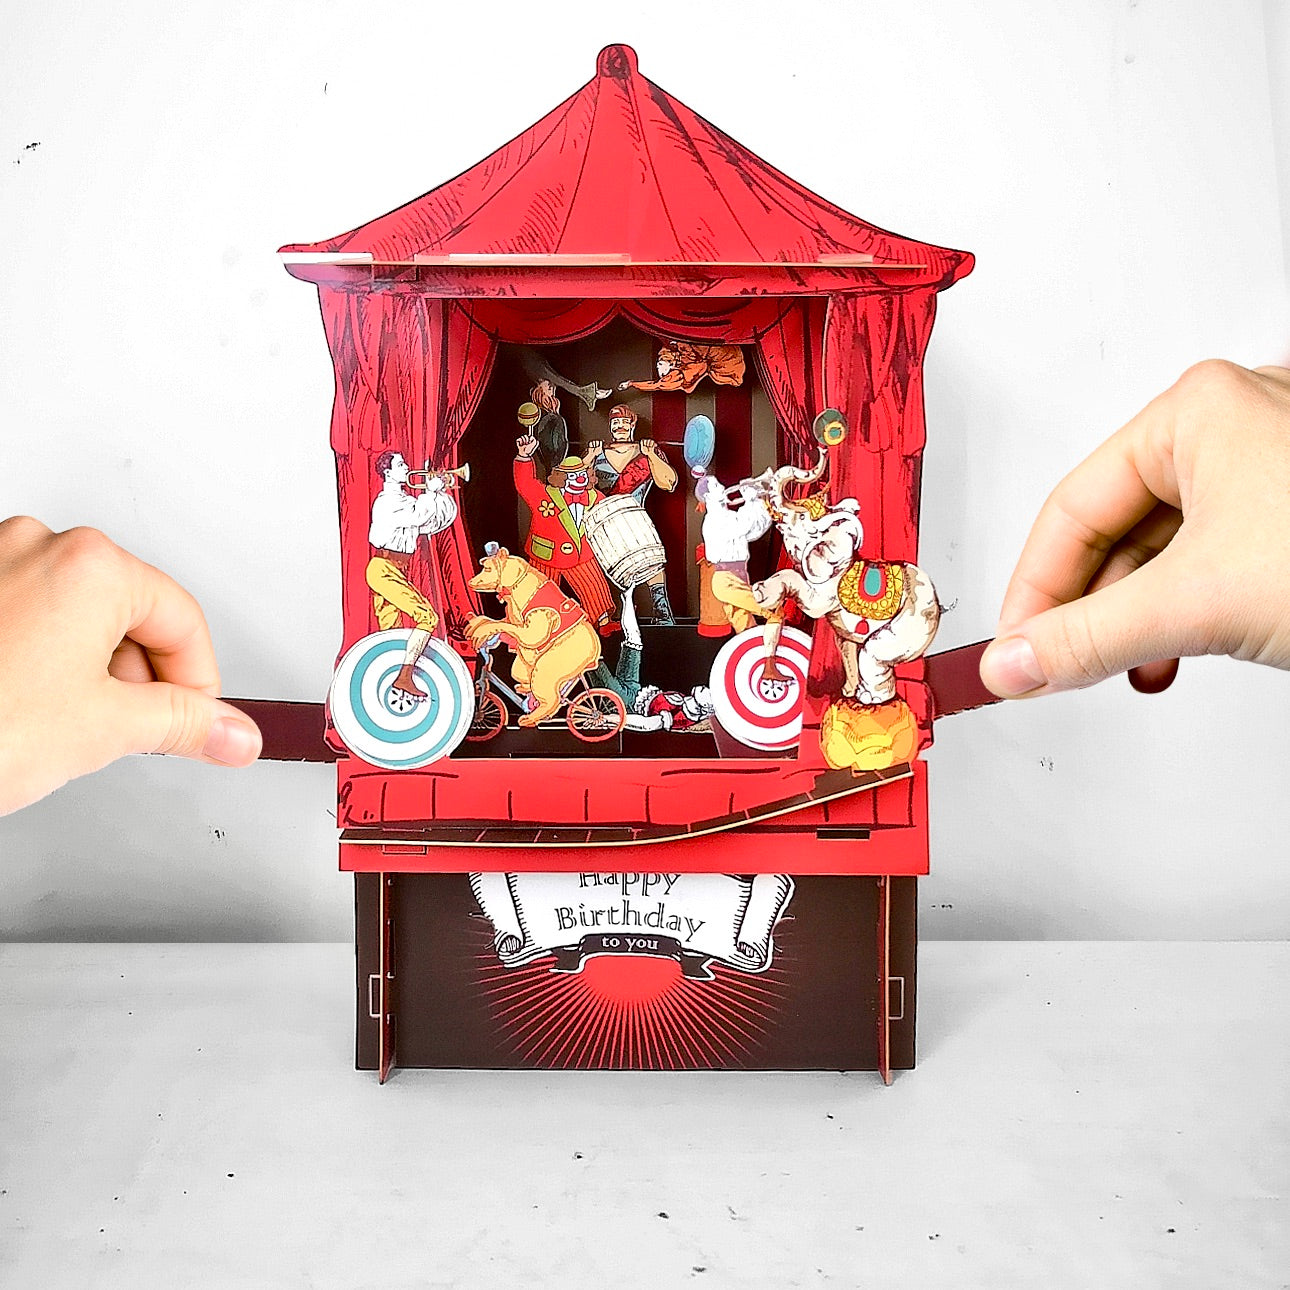 Happy Birthday -Paper Theatre 3D Pop Up Greeting Card -Circus Performers